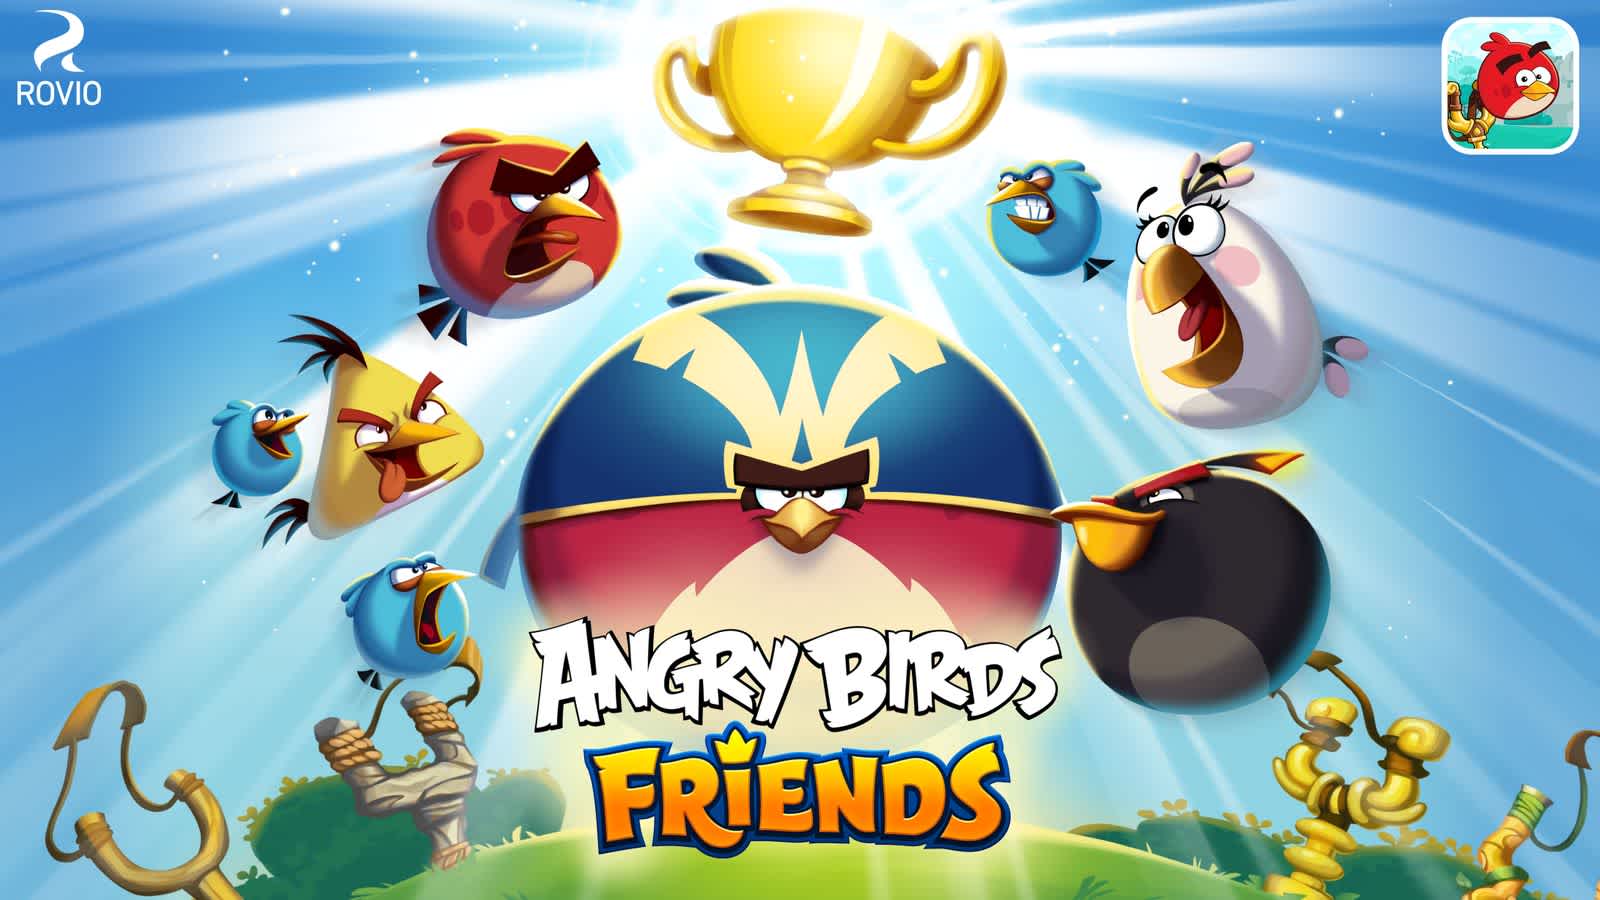 Cleaning up the bugs for some friendly angry birds